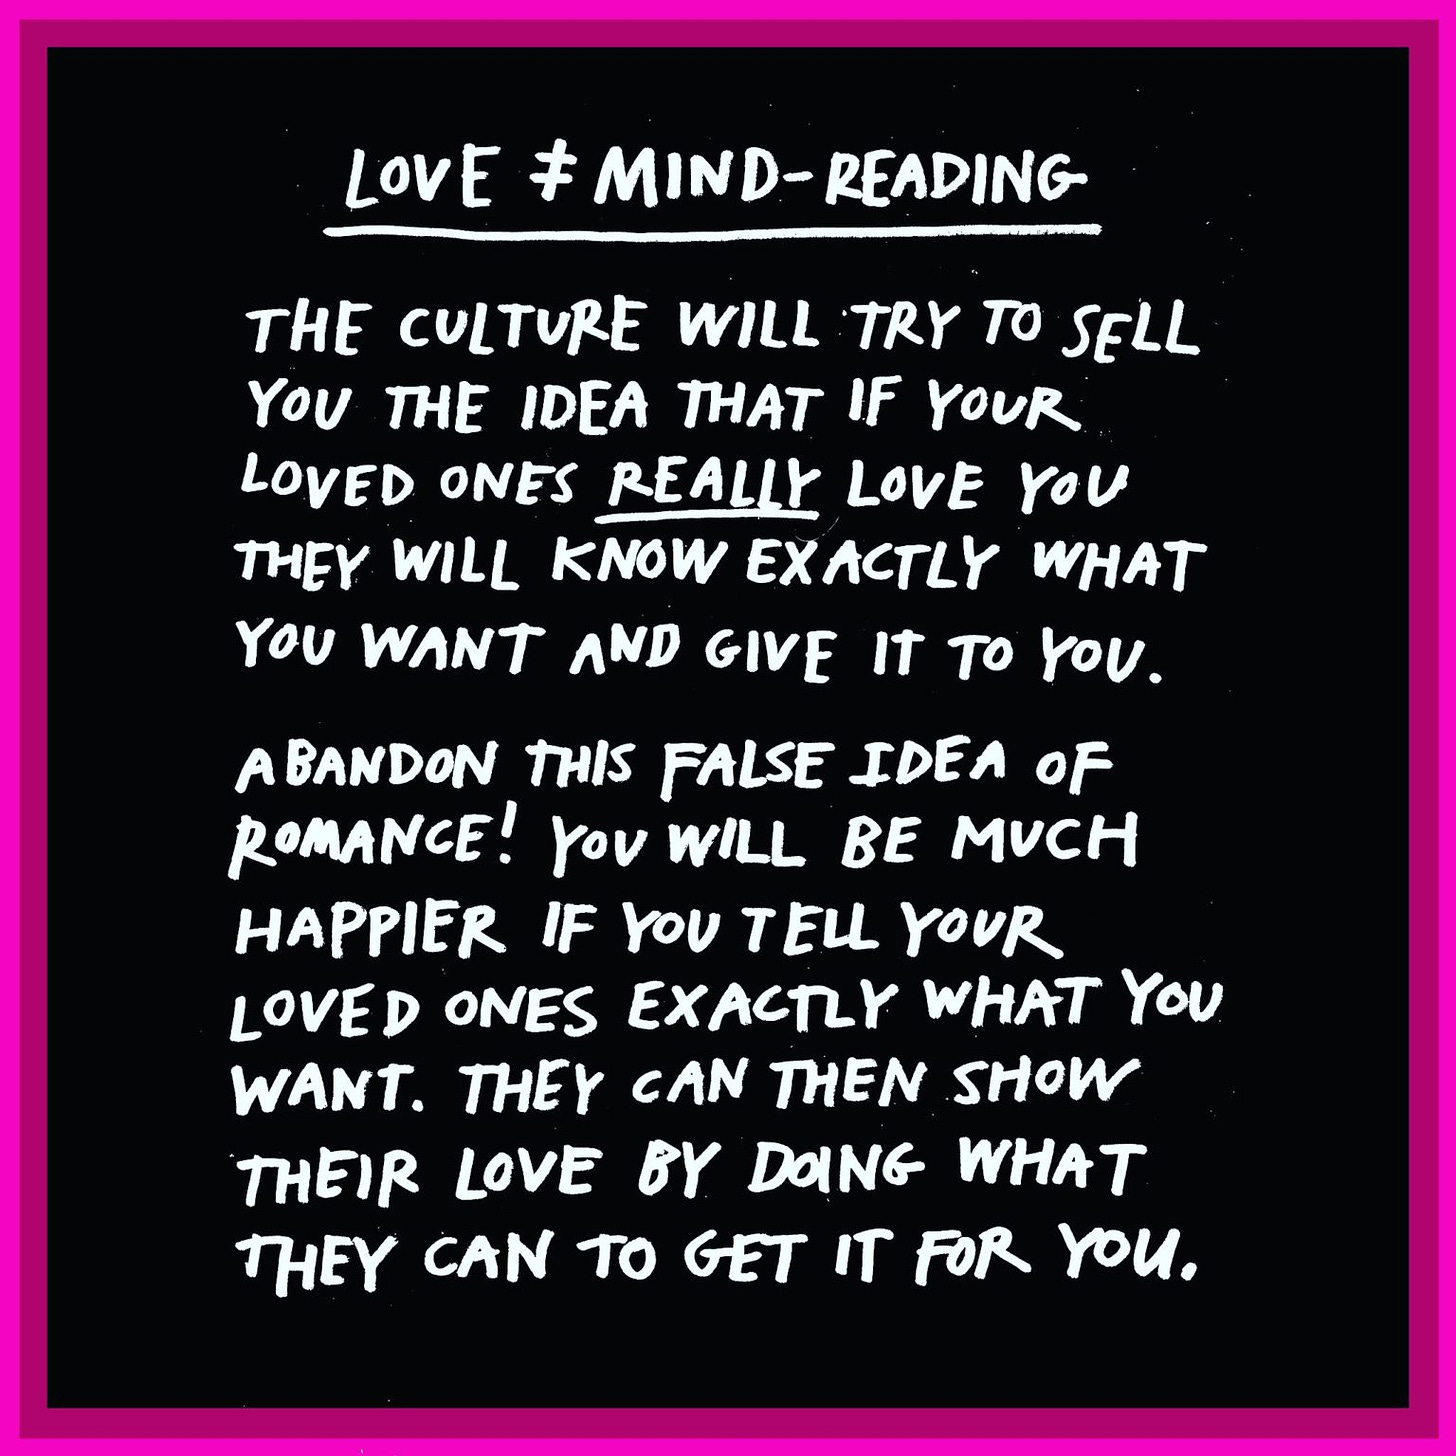 LovE ‡ MIND-READING THE CULTURE WILL TRY TO SELL YOU THE IDEA THAT IF YOUR LOVED ONES REALLY LOVE YOU THEY WILL KNOW EXACTLY WHAT YOU WANT AND GIVE IT TO YOU. ABANDON THIS FALSE IDEA oF ROMANCE! YOU WILL BE MUCH HAPPIER IF yoU TELL YOUR LOVED ONES EXACTLY WHAT YOU WANT. THEY cAN THEN SHOw THEIR LOVE BY DOING WHAT THEY CAN TO GET IT For YoU.